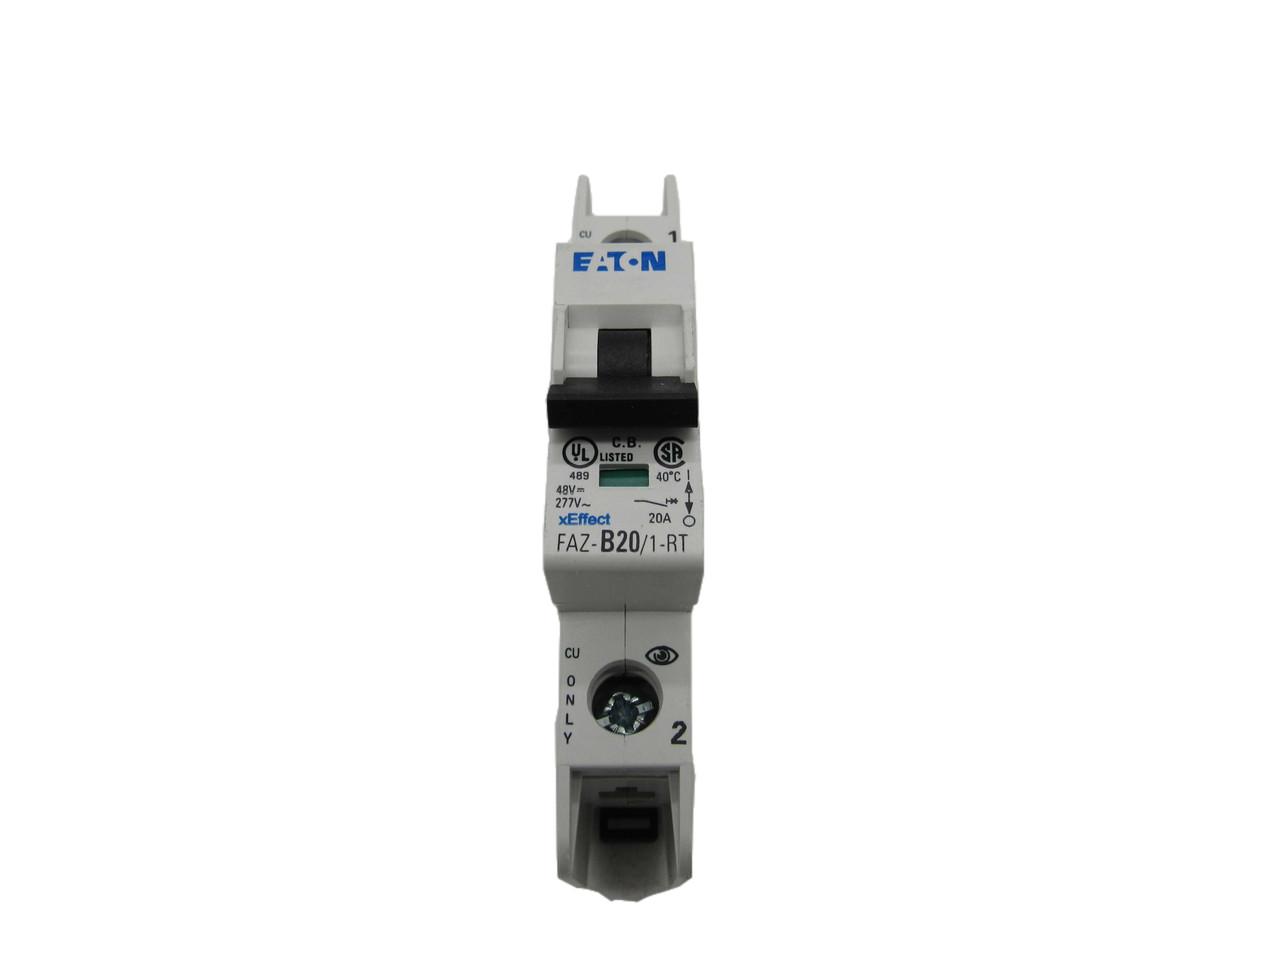 Eaton FAZ-B20/1-RT 277/480 VAC 50/60 Hz, 20 A, 1-Pole, 10/14 kA, 3 to 5 x Rated Current, Ring Tongue Terminal, DIN Rail Mount, Standard Packaging, B-Curve, Current Limiting, Thermal Magnetic